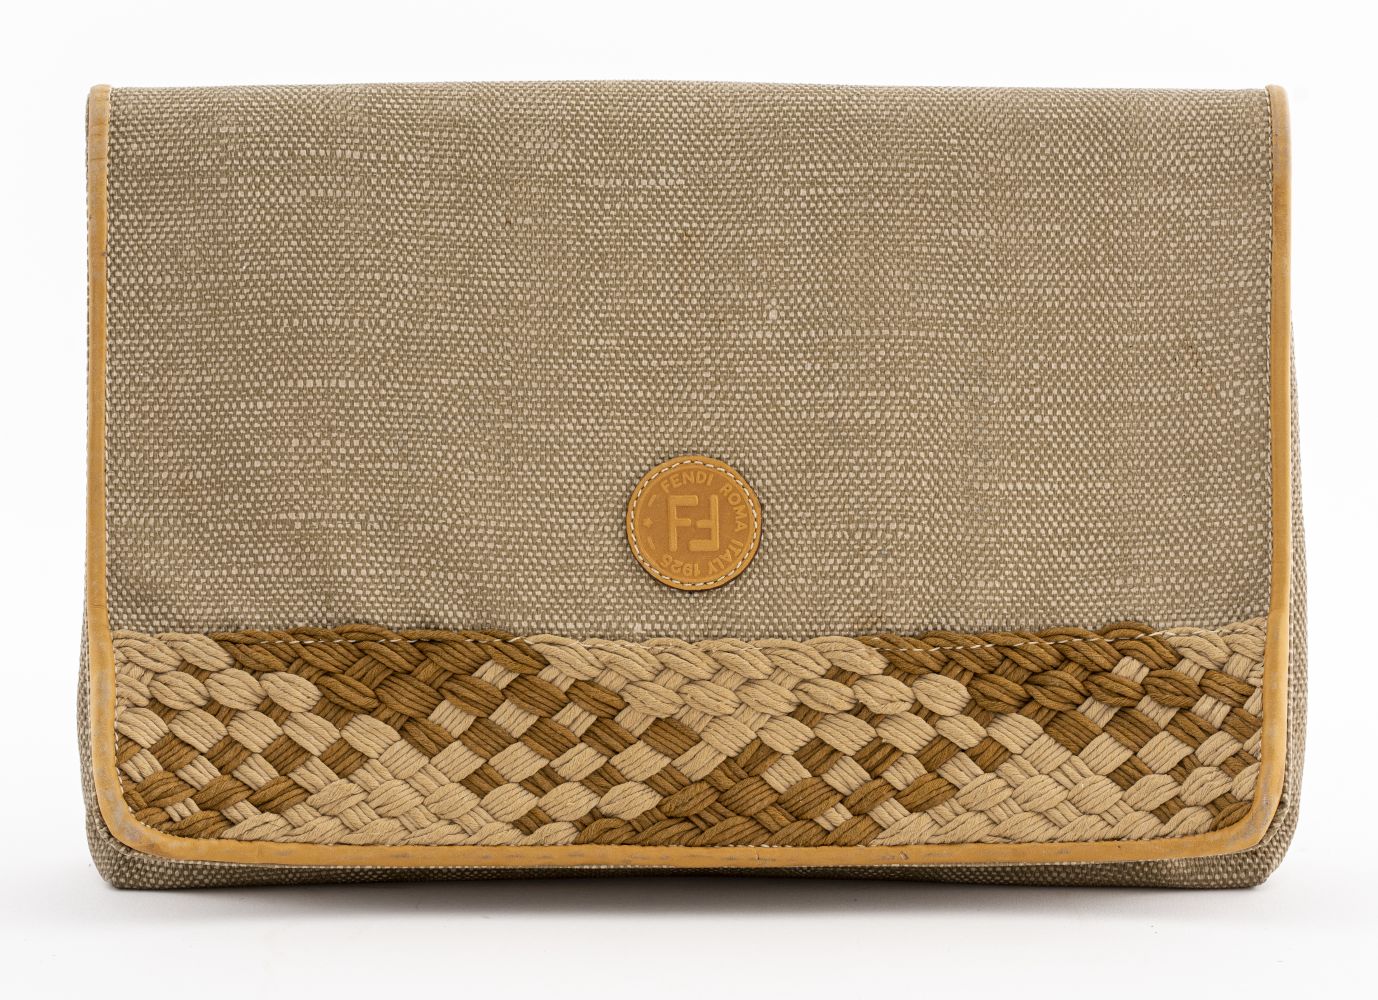 FENDI BEIGE WOVEN STRAW AND LEATHER 3c5658